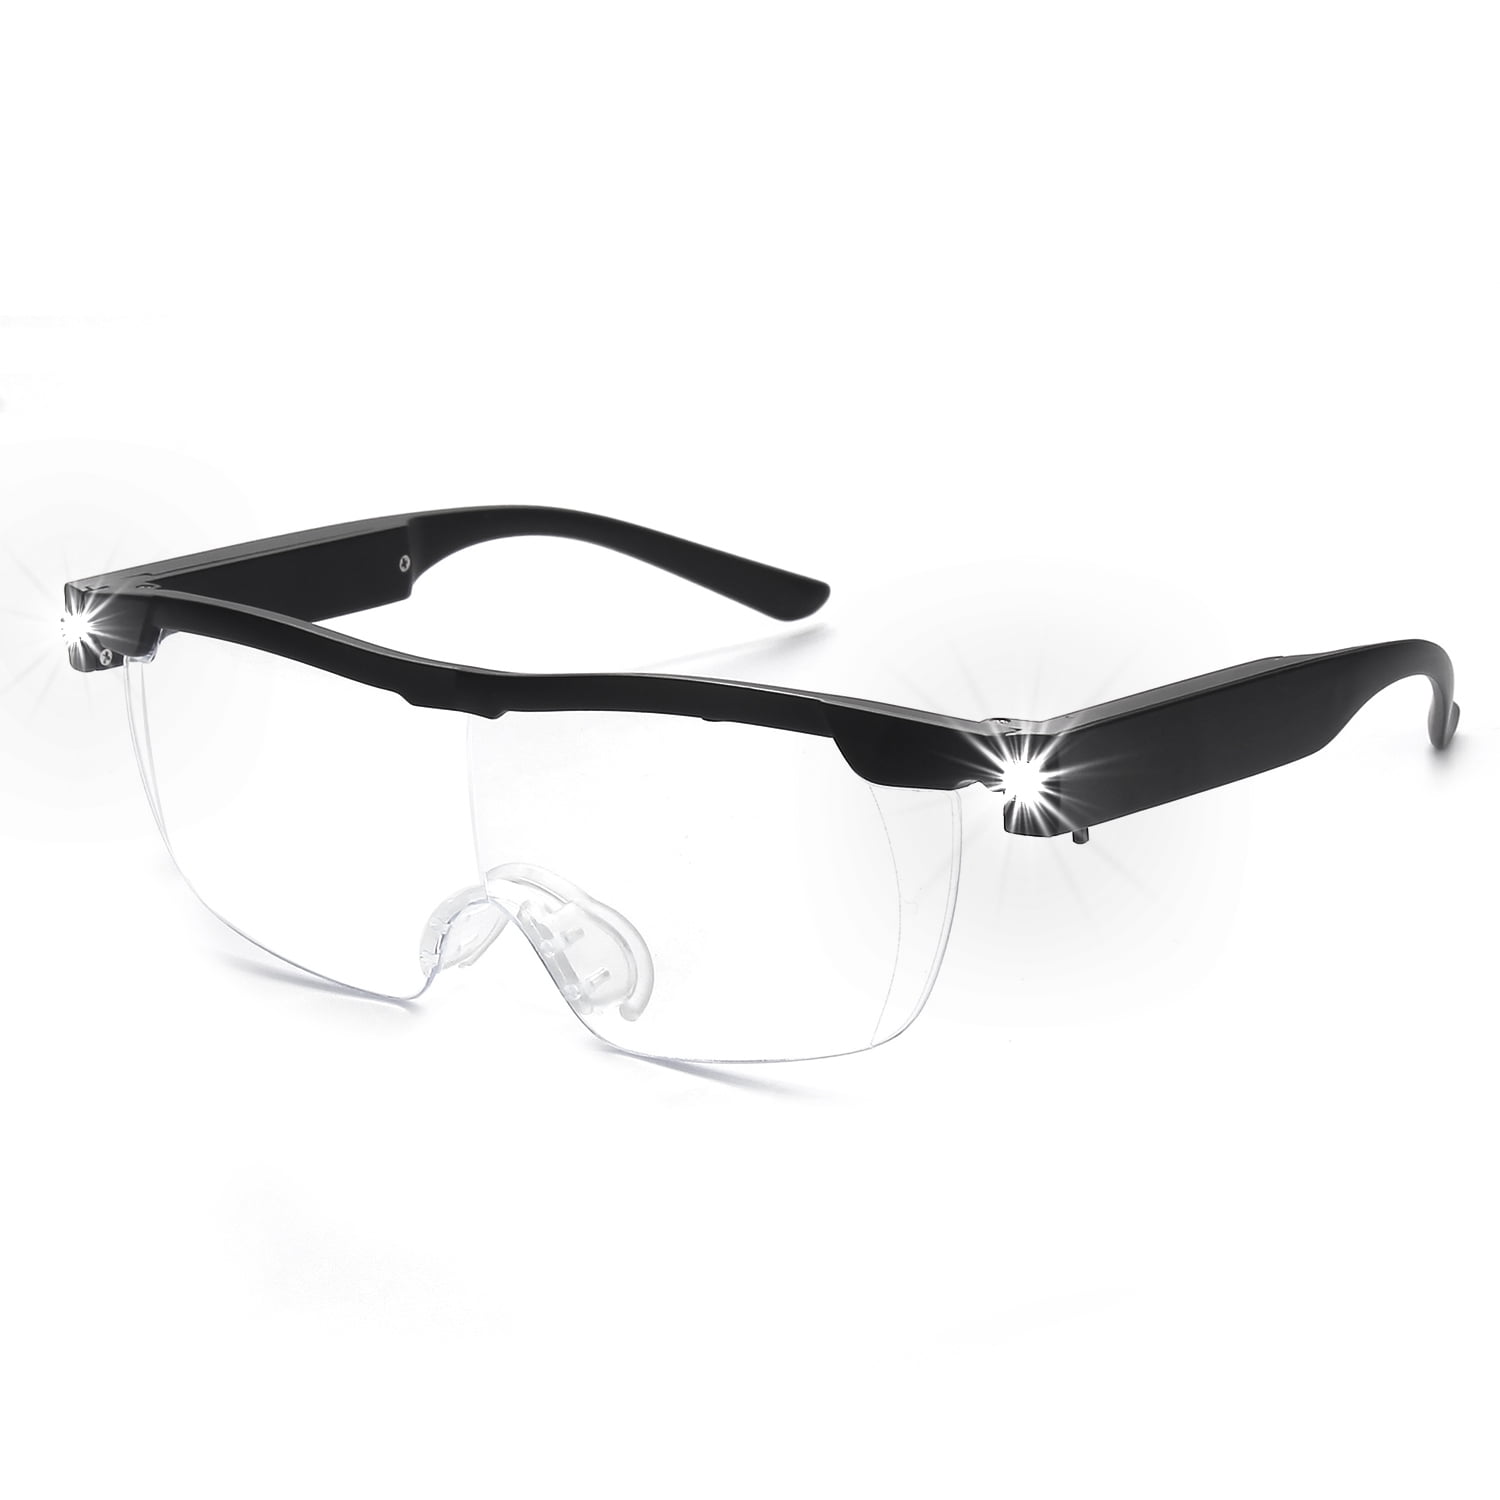 Lighted Reading Glasses - Magnifying Eyeglasses With Light for Crystal View  Small Details - Unisex Led Magnifying Glasses With Light For Close Work 